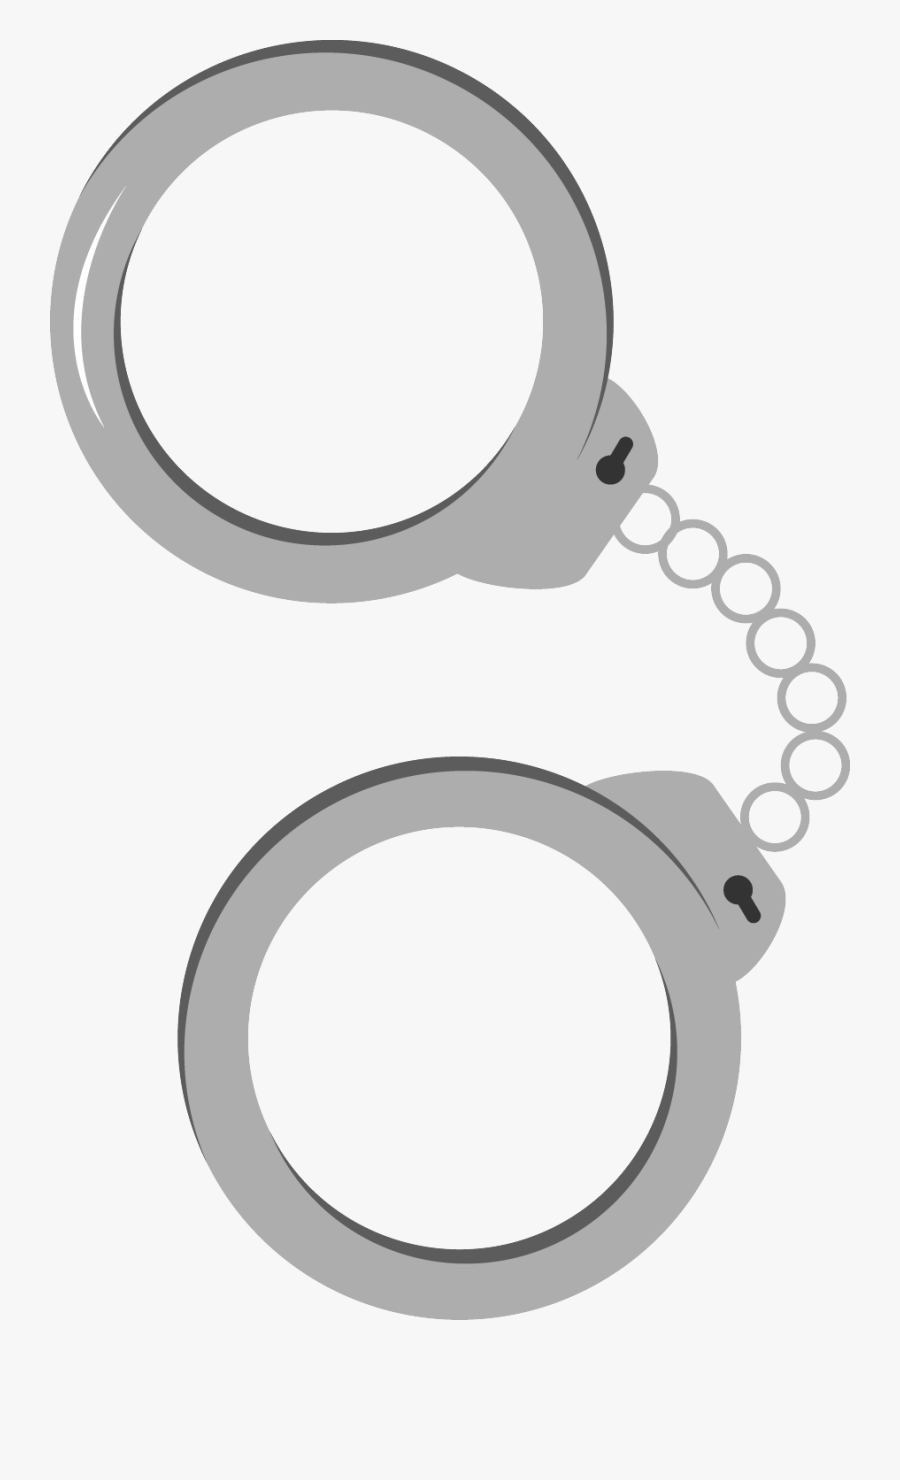 Police Firefighter Handcuffs Clip Art - Policia Minus, Transparent Clipart